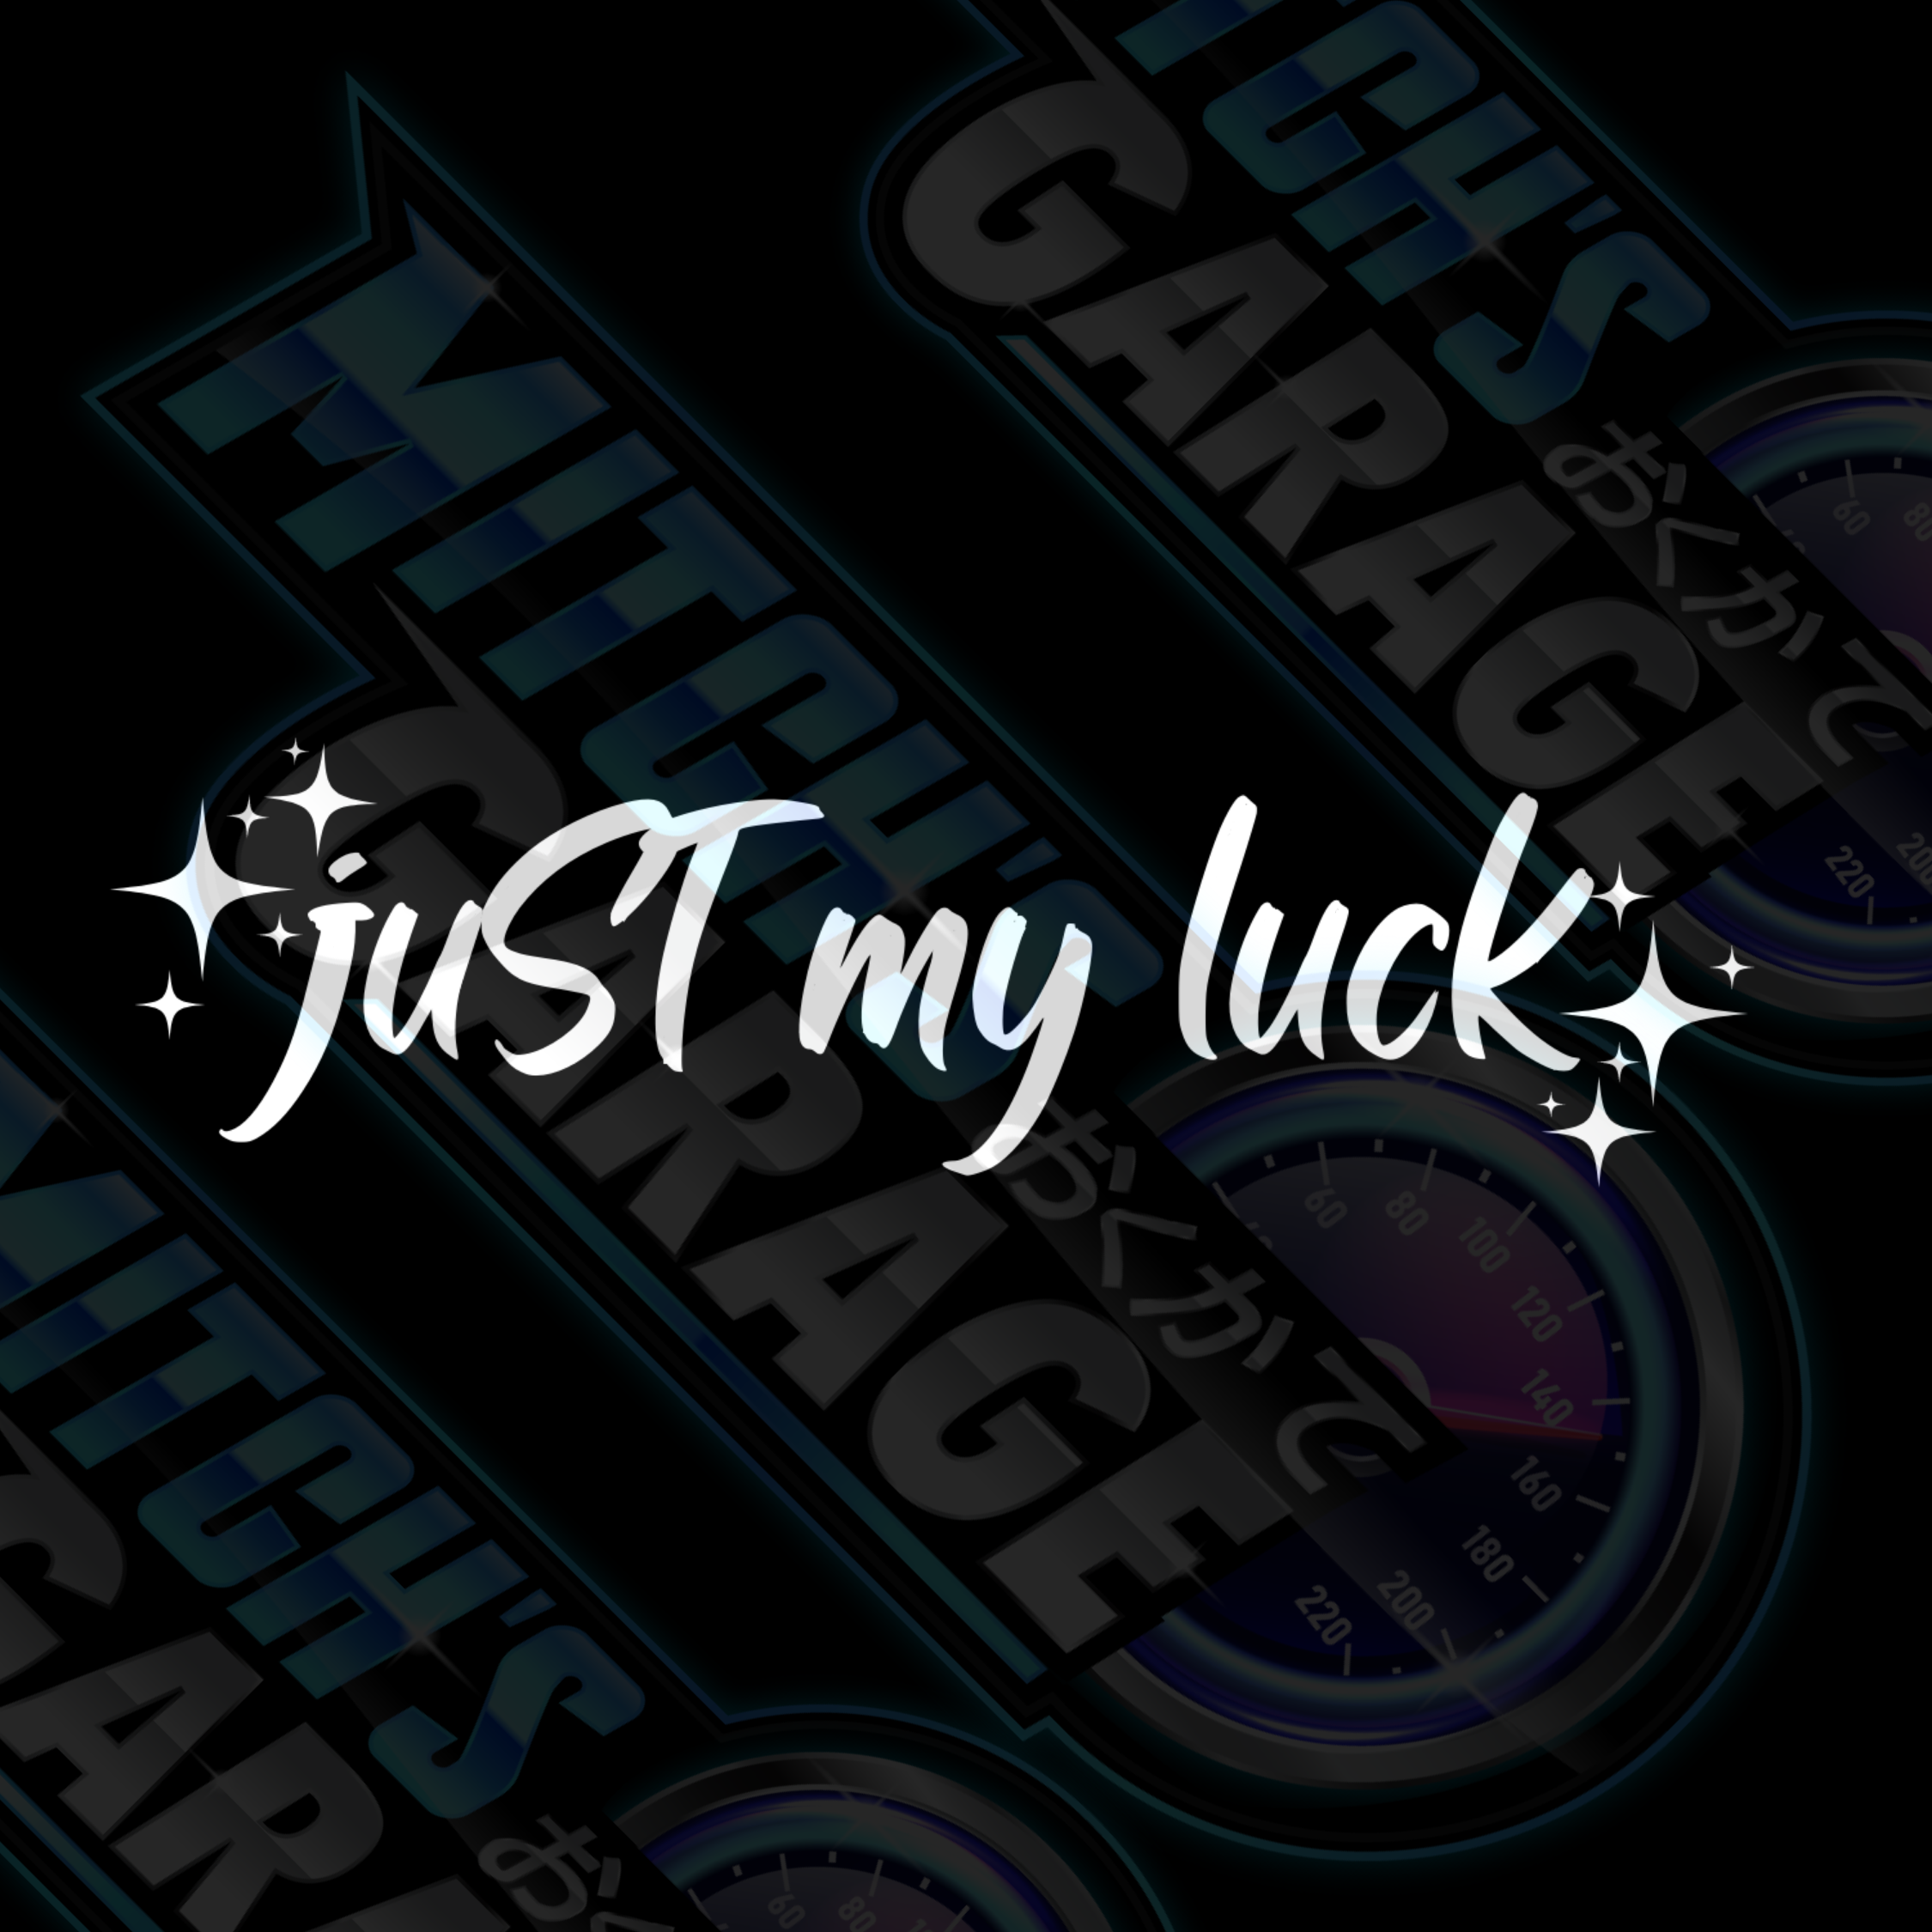 JUST MY LUCK Vinyl Decal